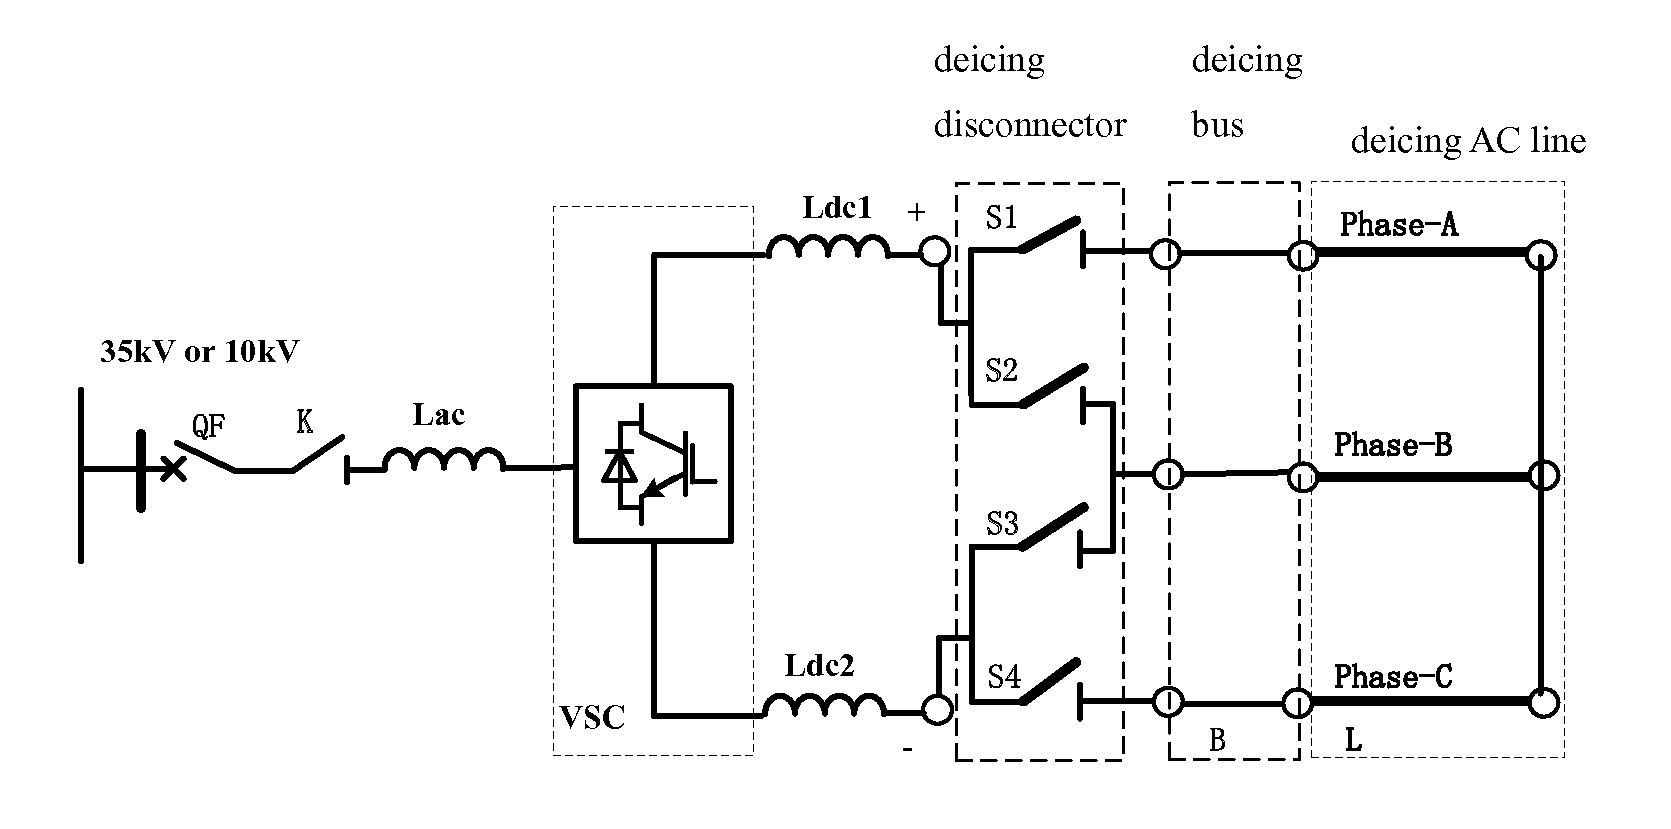 Voltage source converter based direct current deicer and controlling method thereof